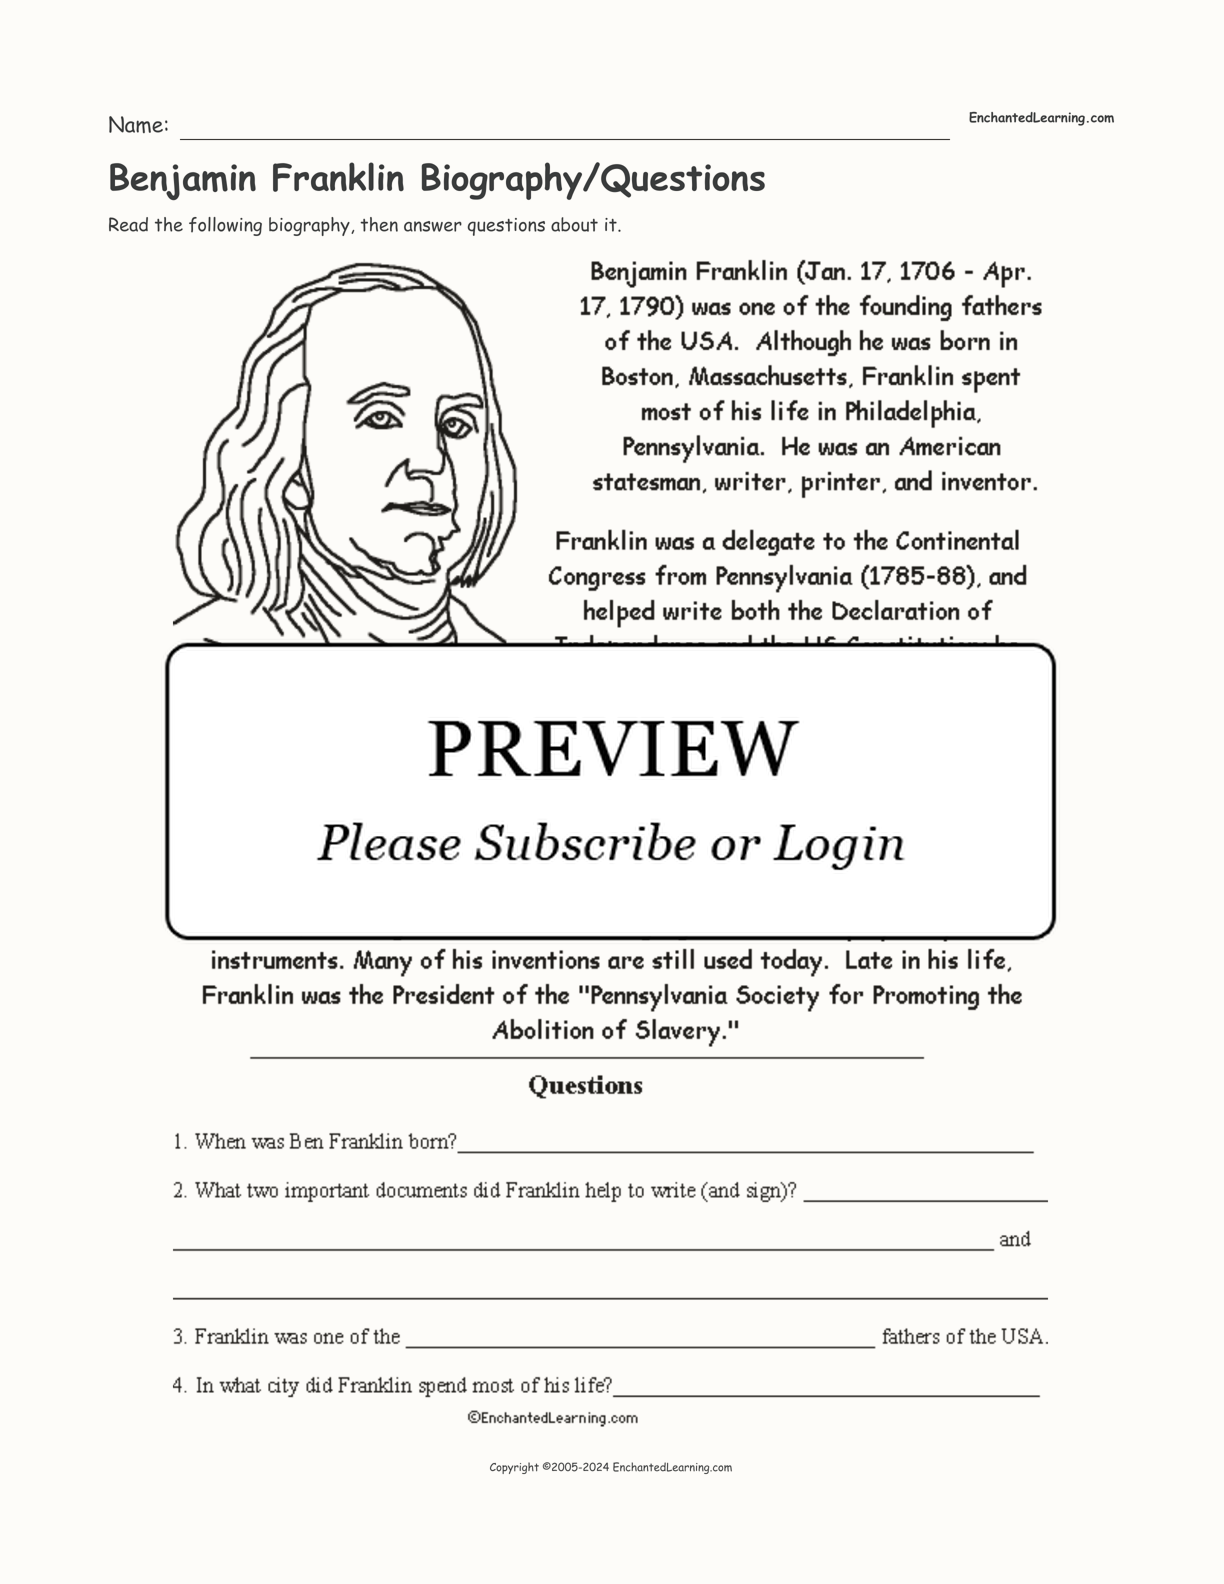 Benjamin Franklin Biography/Questions interactive worksheet page 1